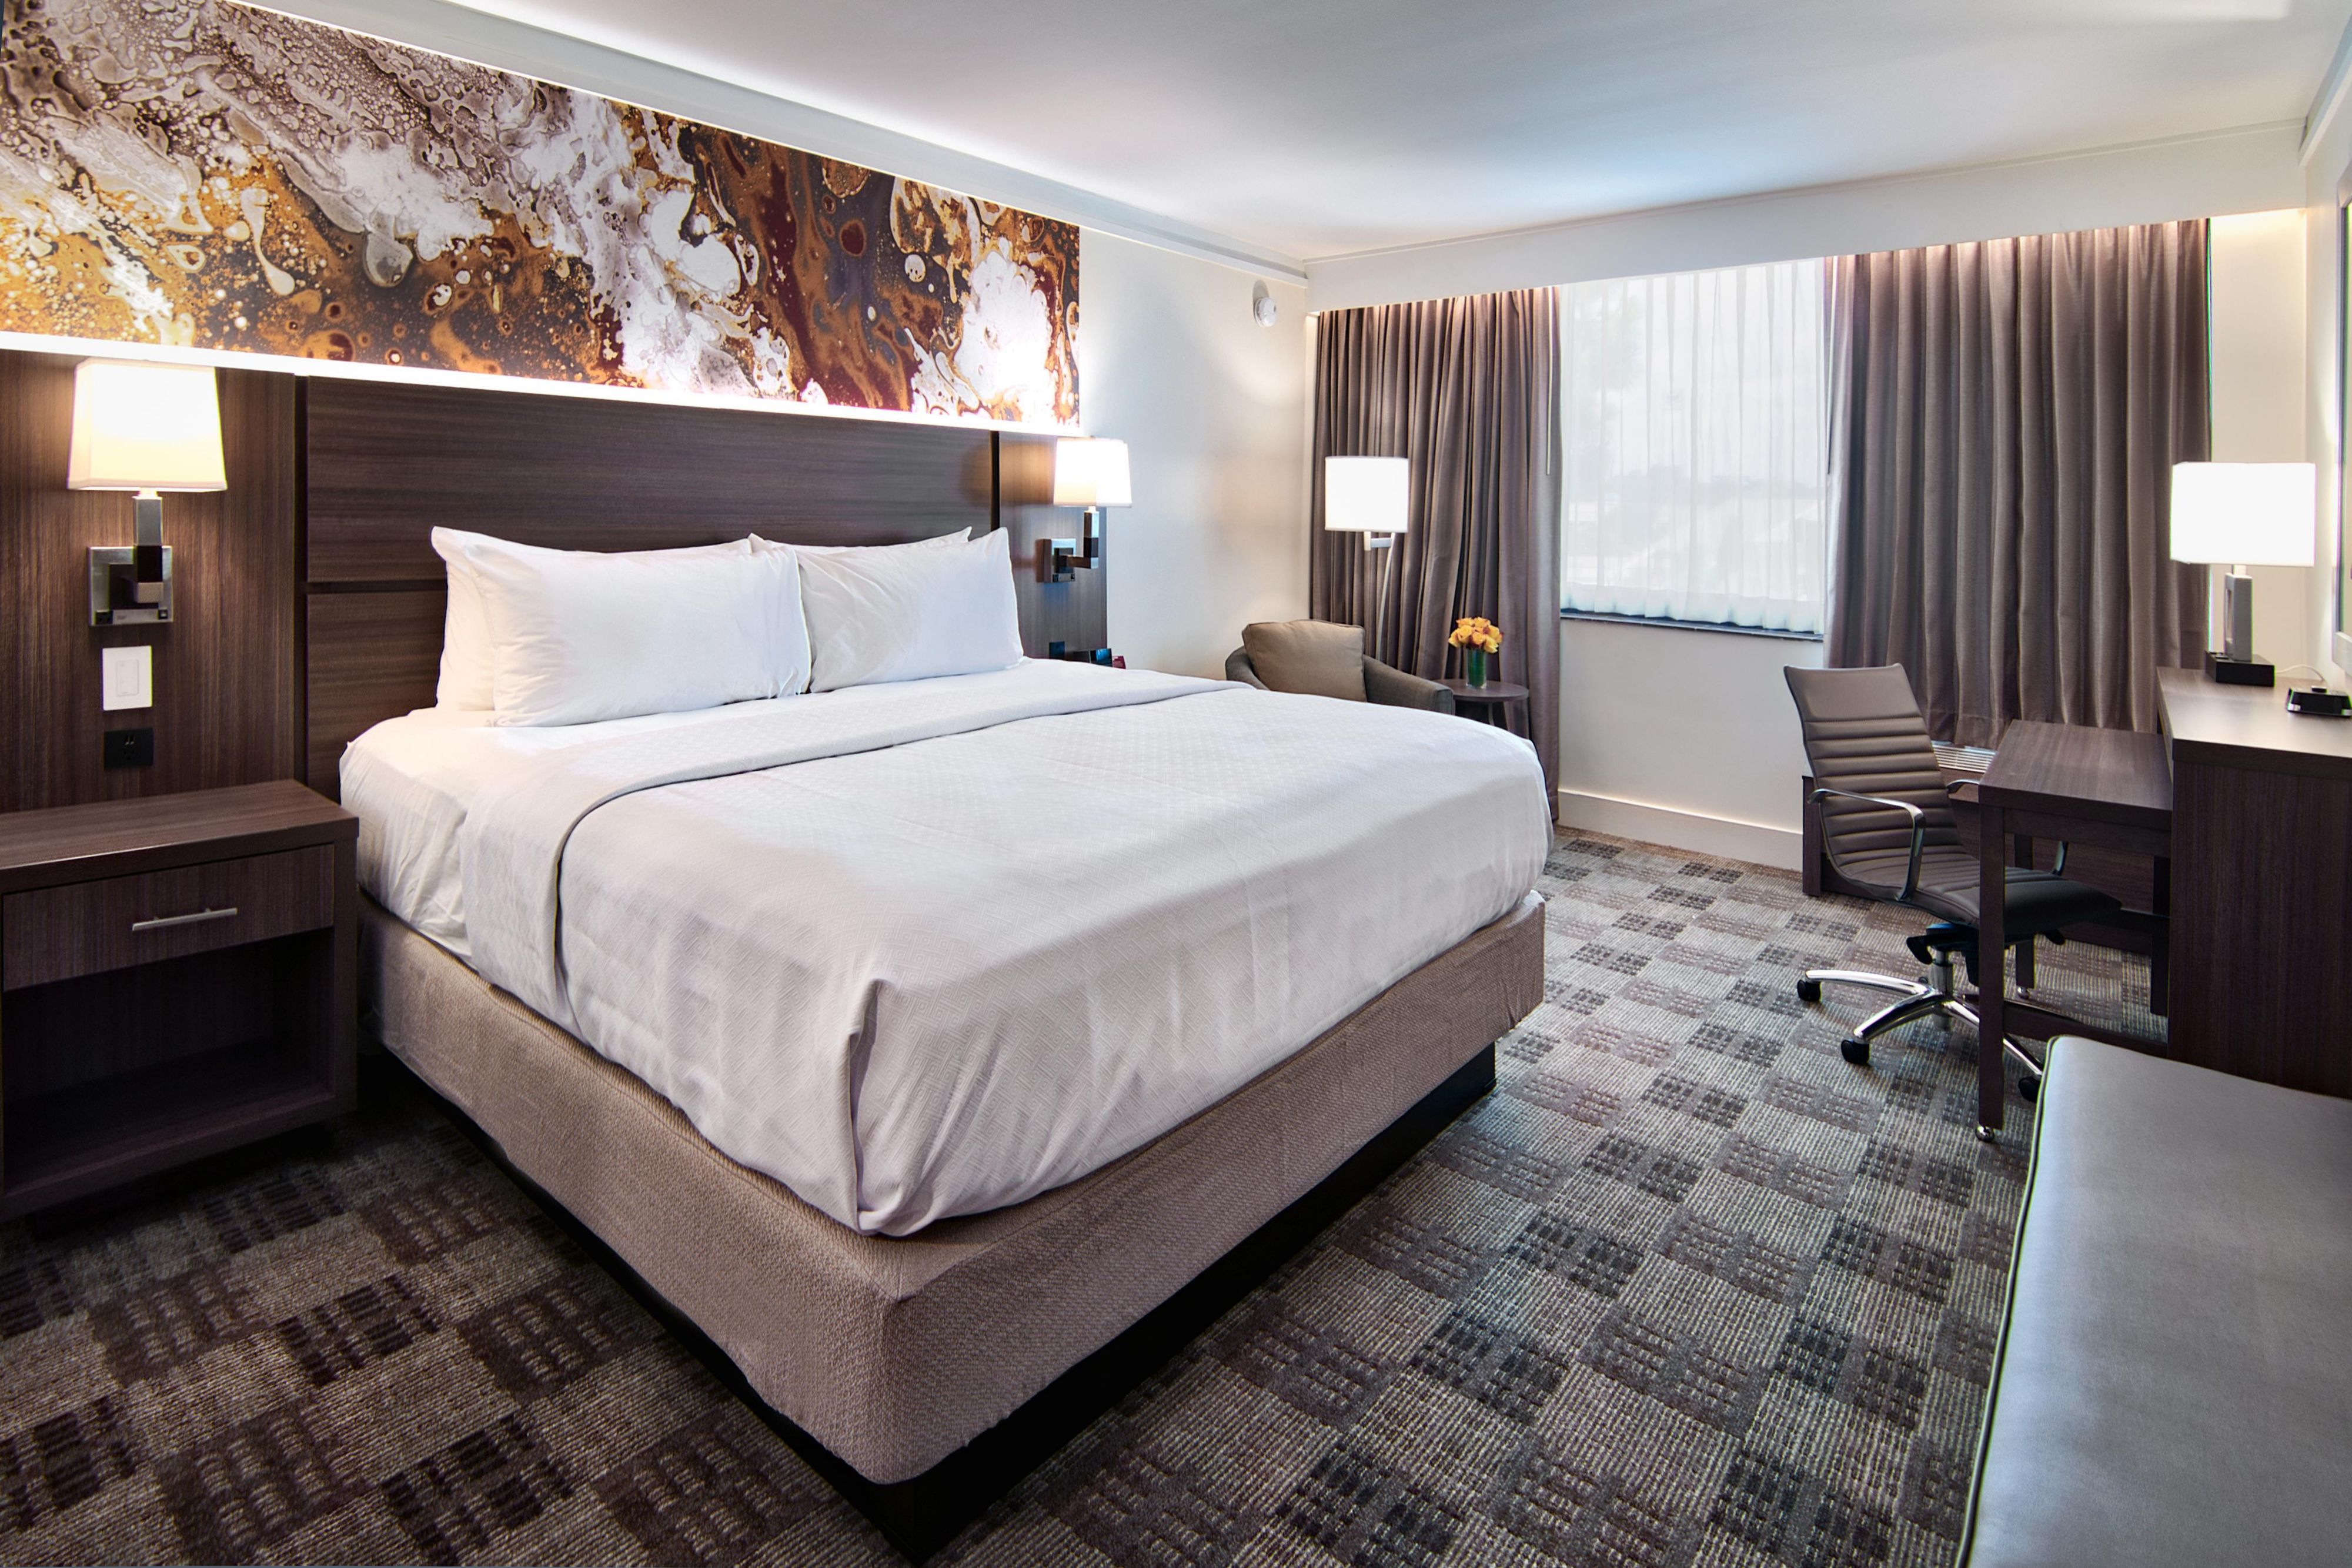 Pay a visit to our newly renovated King Bed Guest Room